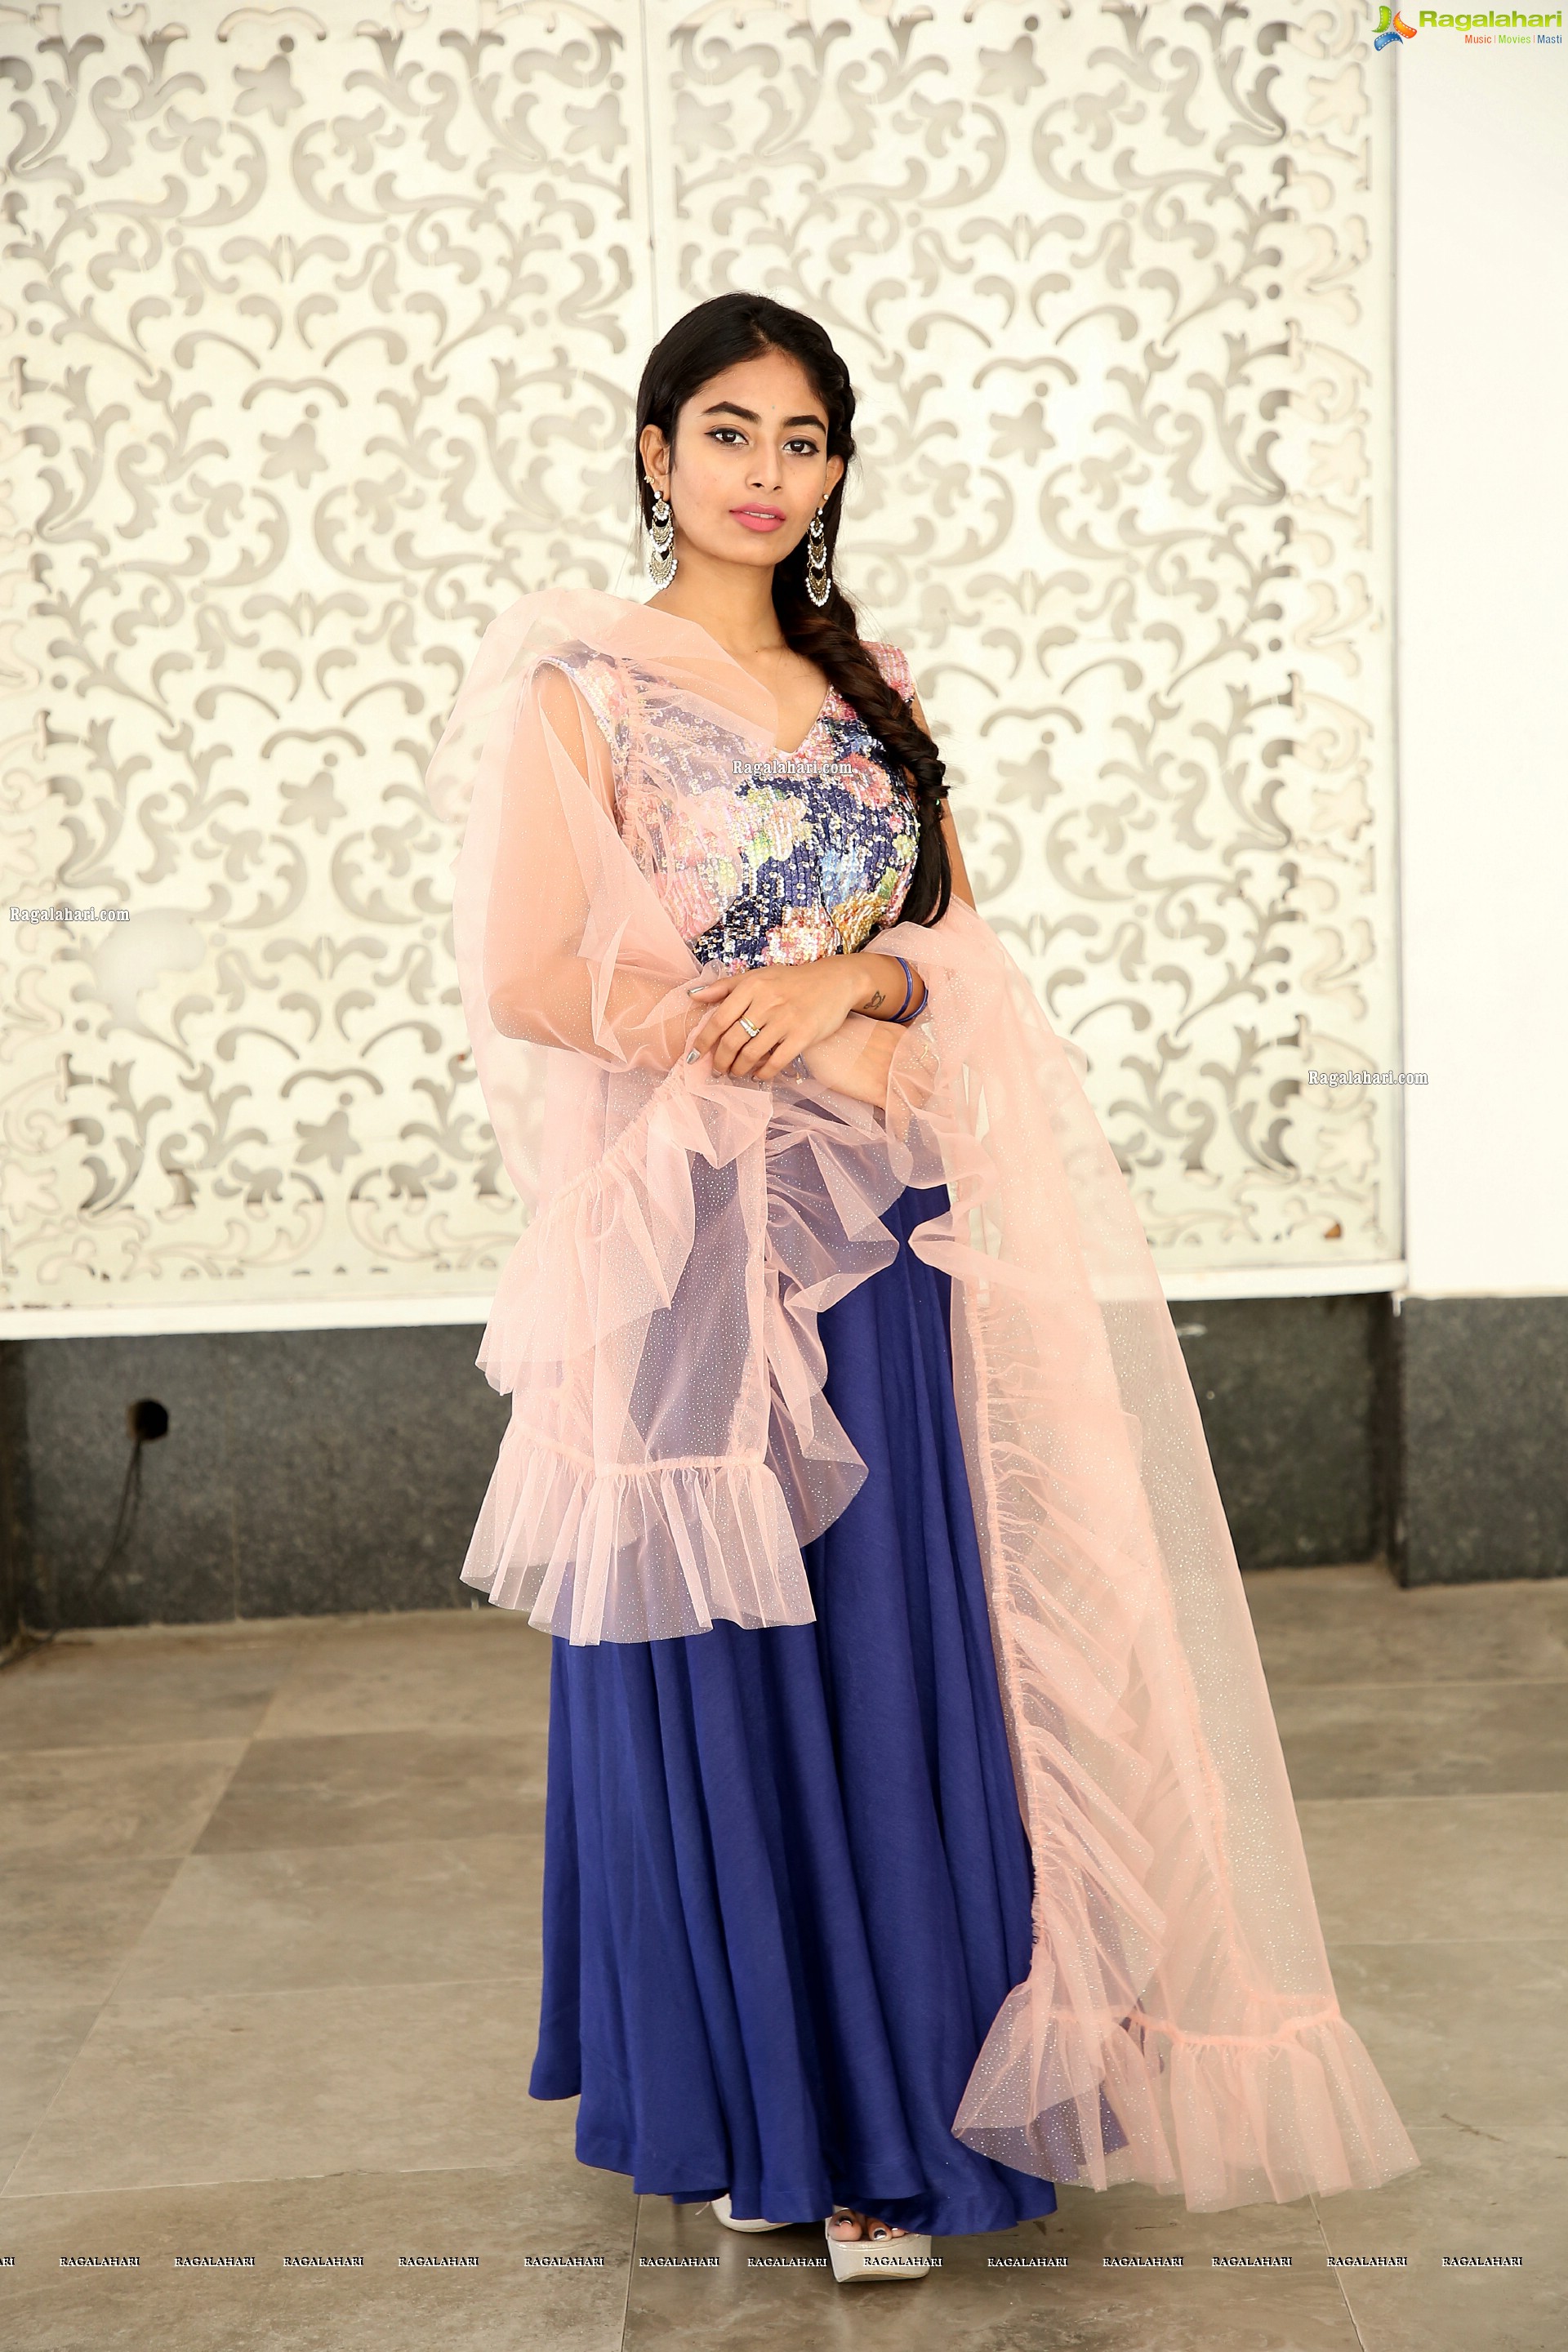 Honey Chowdary at Kolorz Fashion & Lifestyle Exhibition, HD Photo Gallery